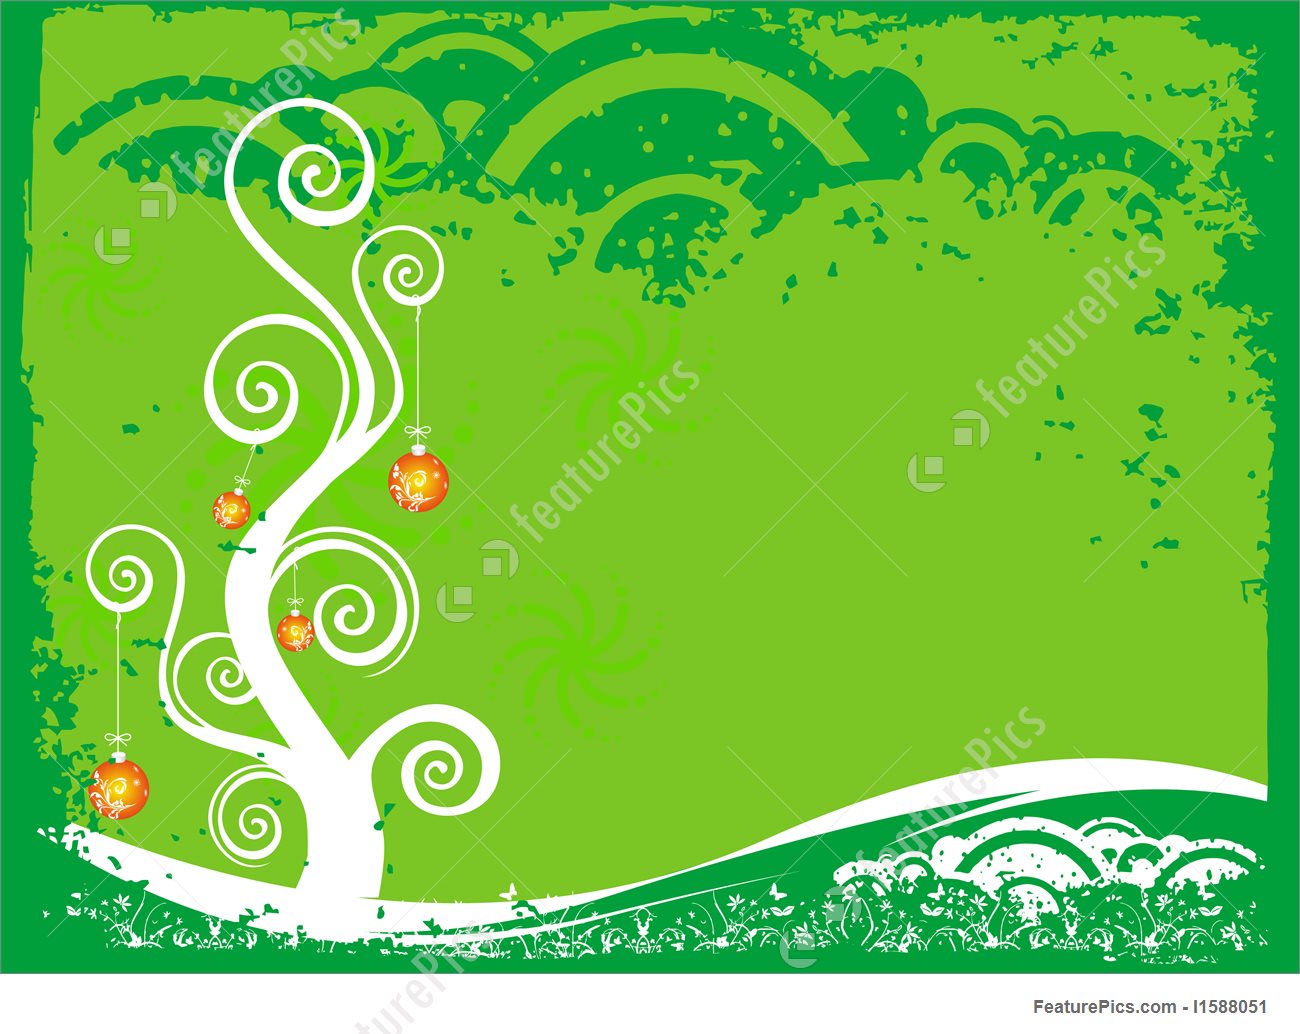 Green Christmas Theme With Tree, Abstract Wallpaper - Illustration - HD Wallpaper 